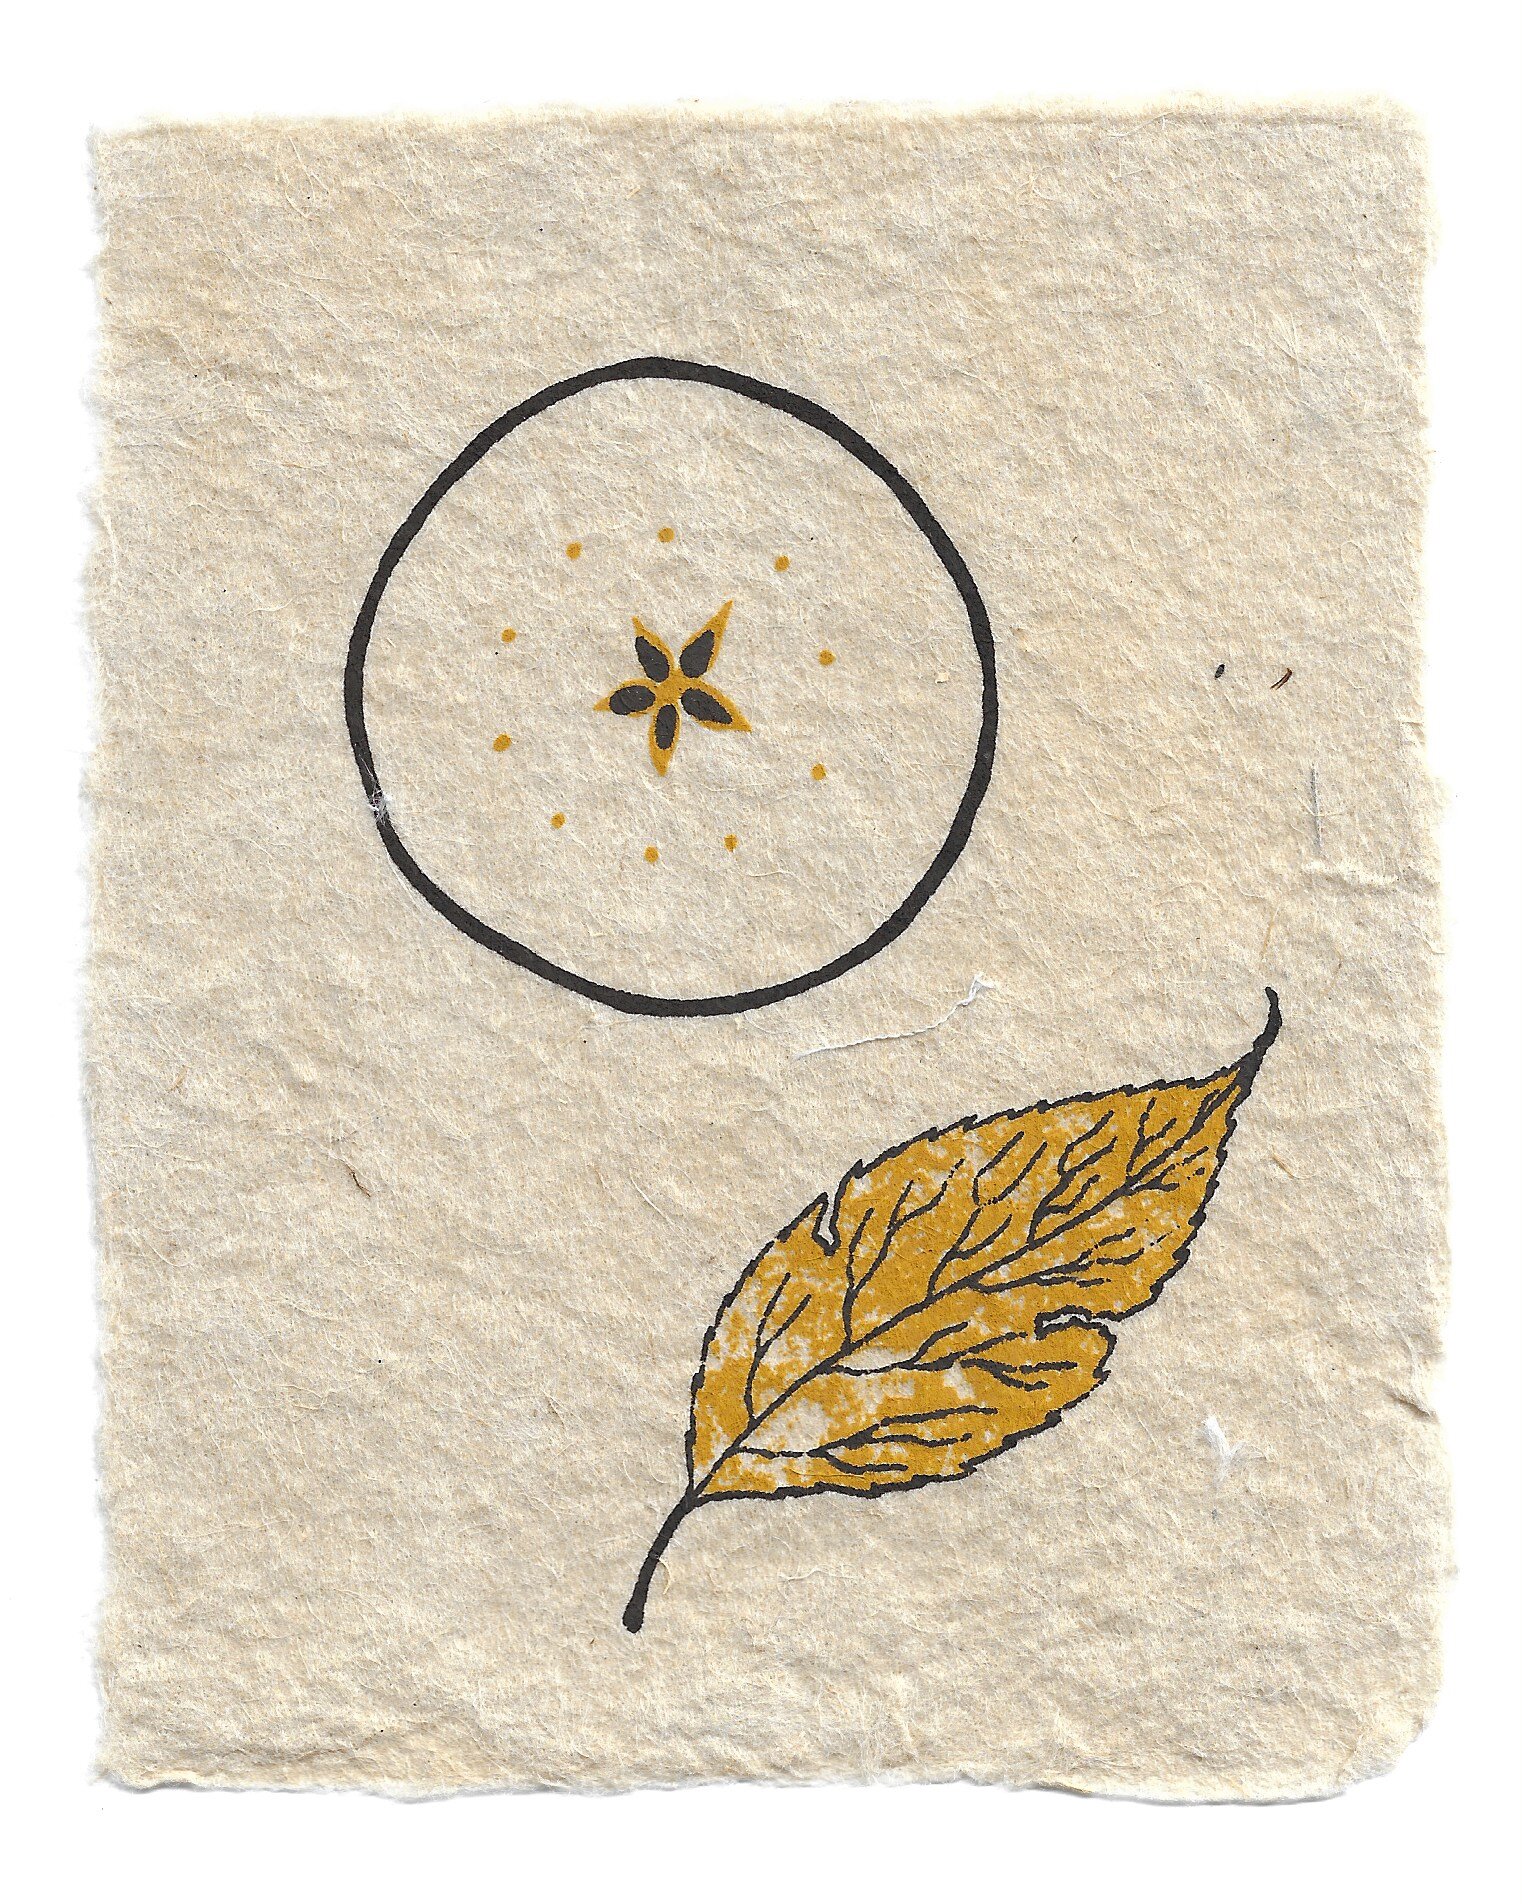 orchard relics (flax paper)